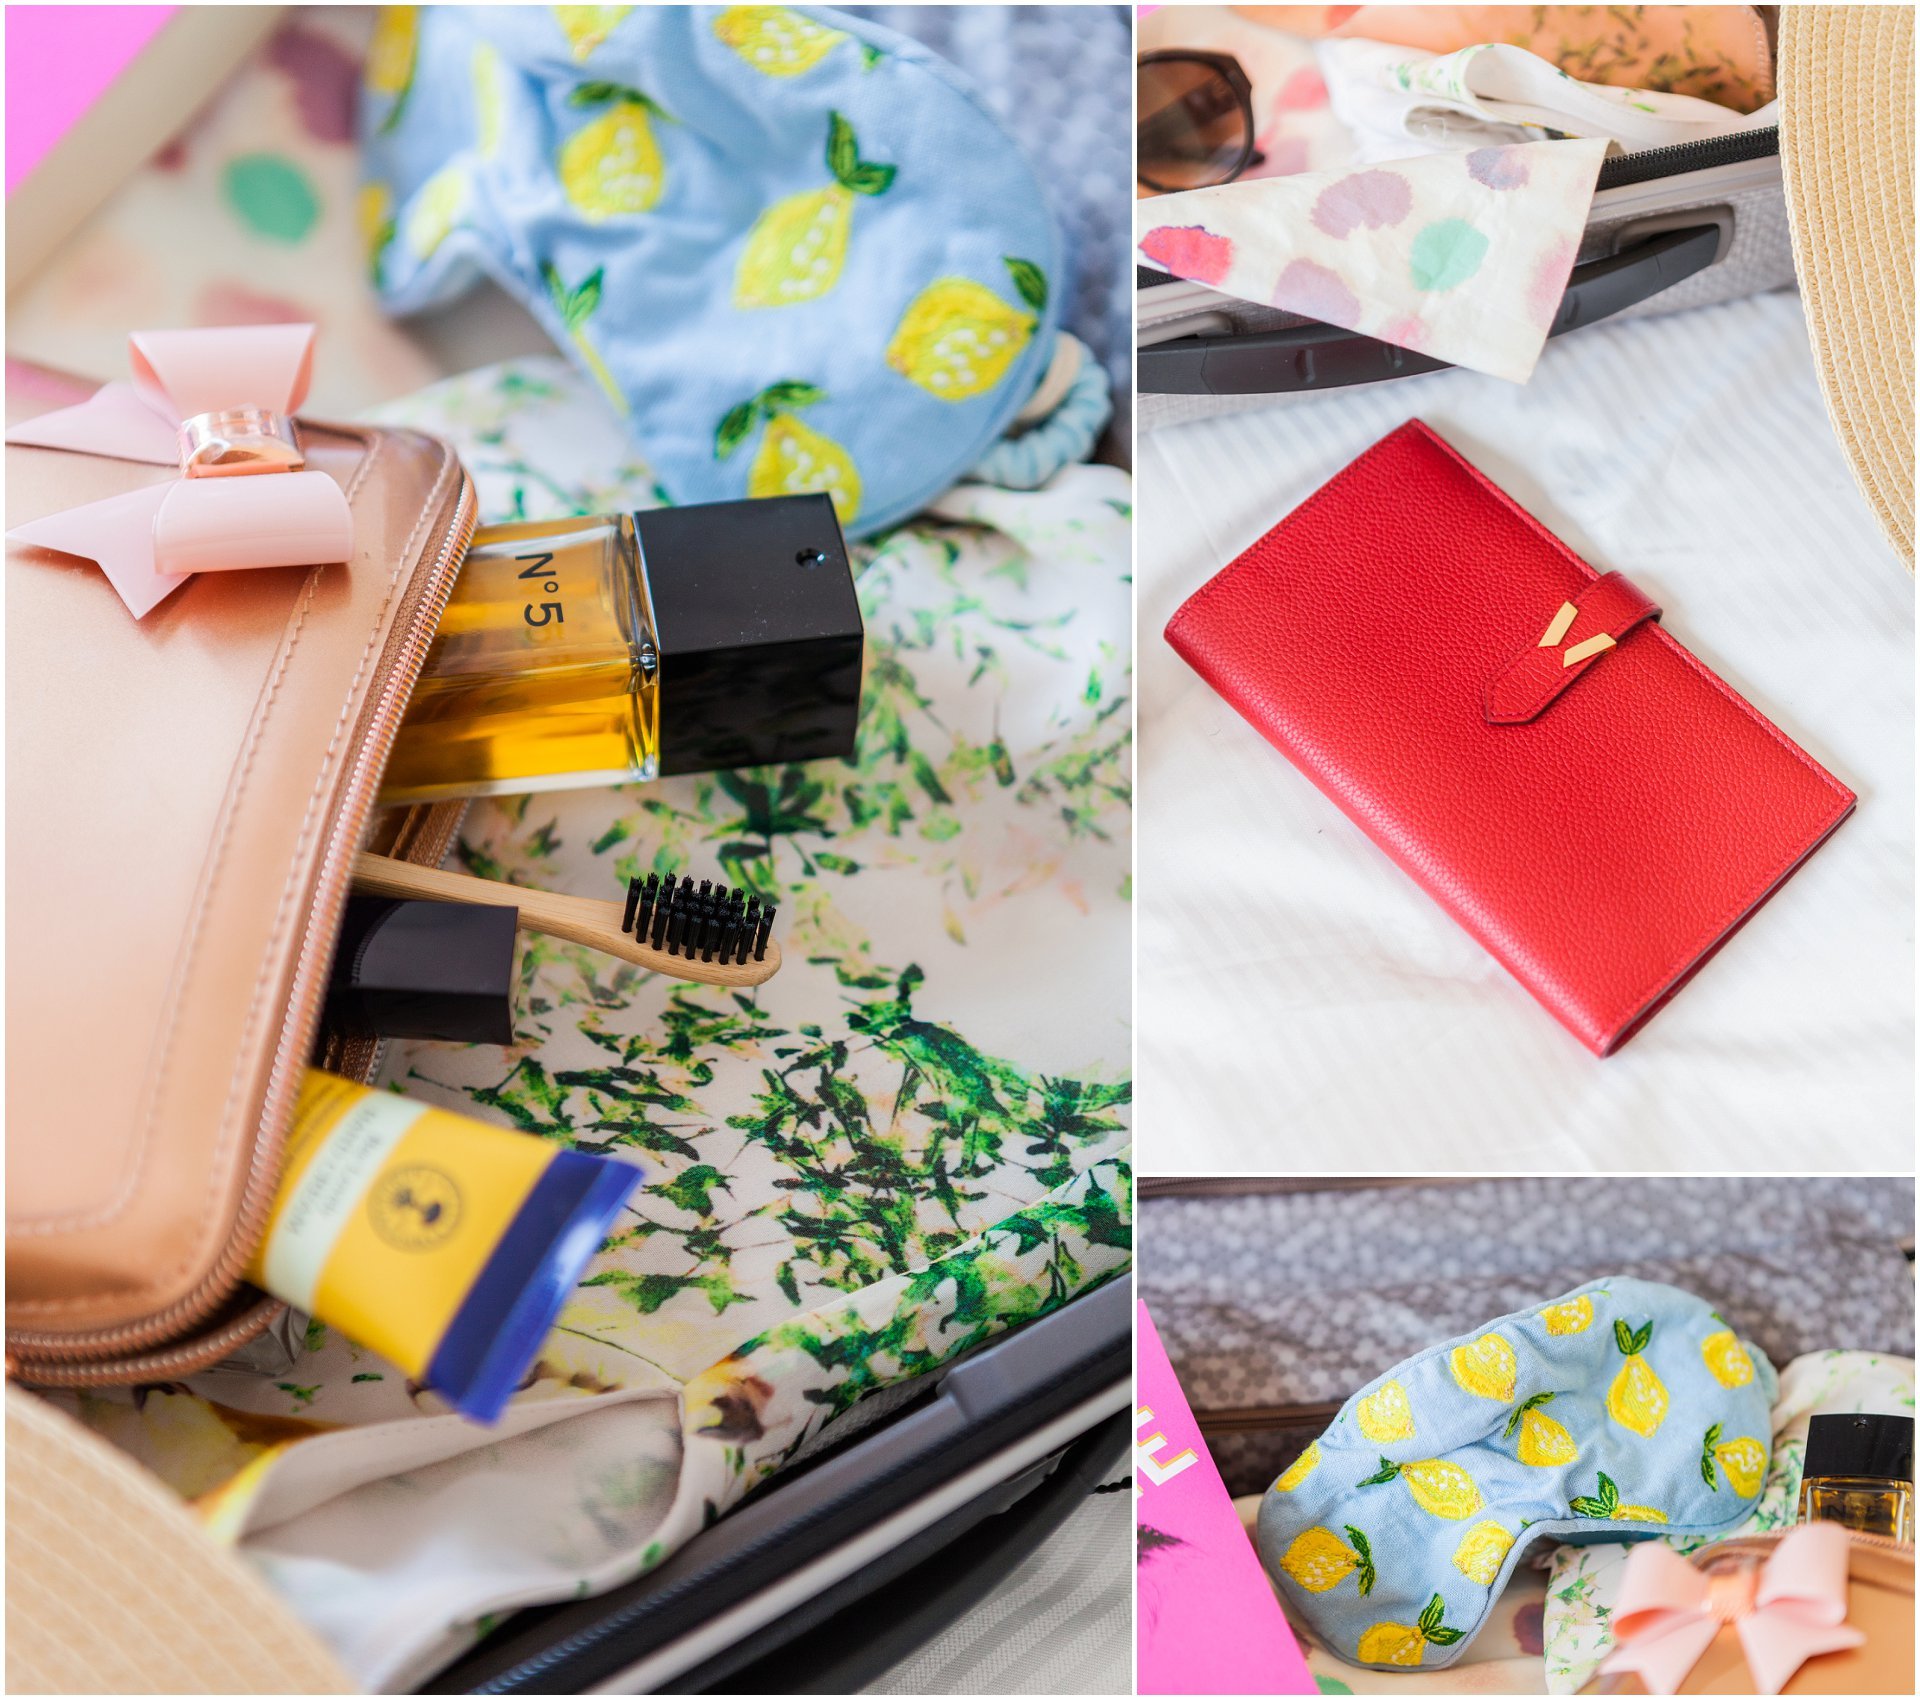 honeymoon travel accessories - London brand photography - styled product photography